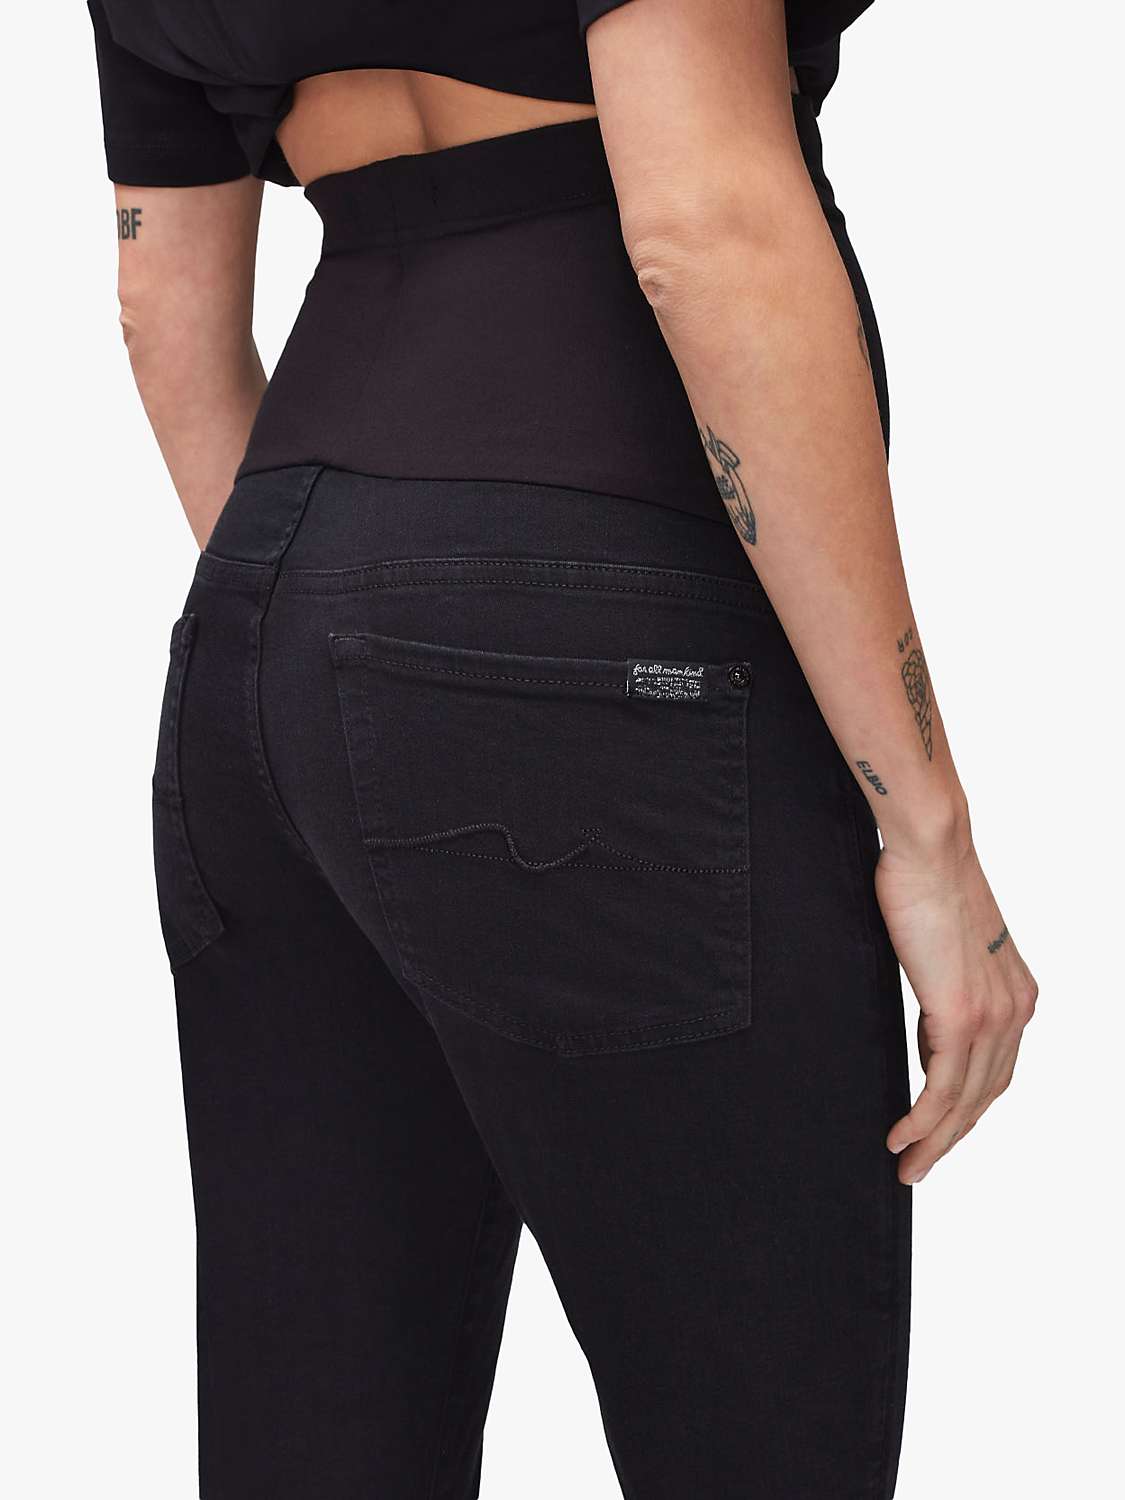 Buy 7 For All Mankind Straight Cut Maternity Jeans Online at johnlewis.com